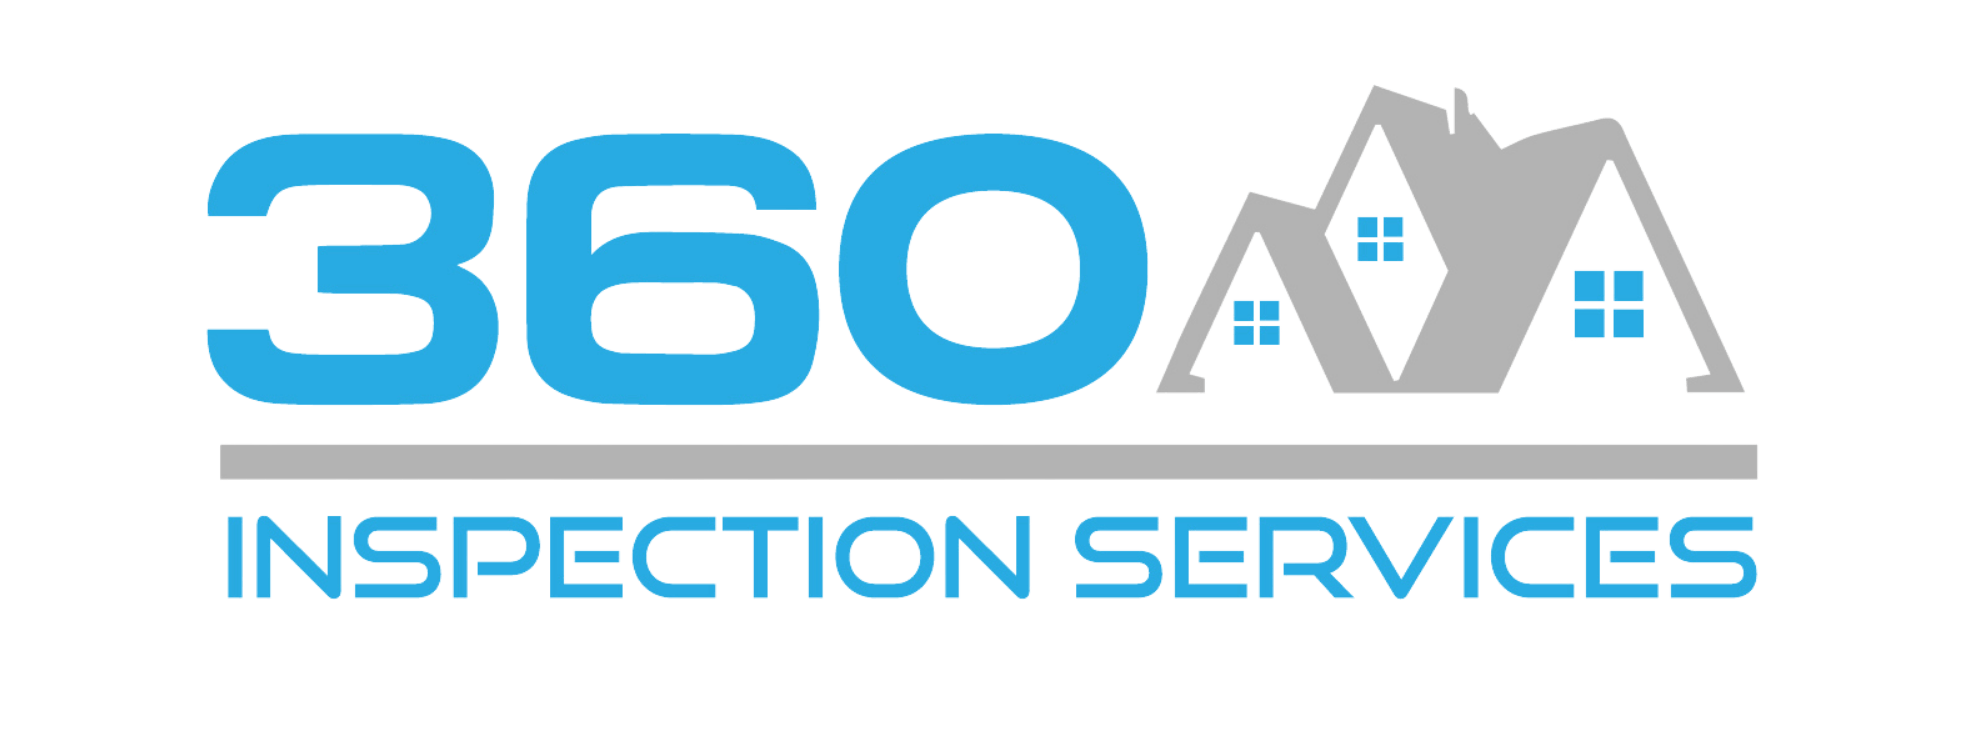 360 Inspection Services